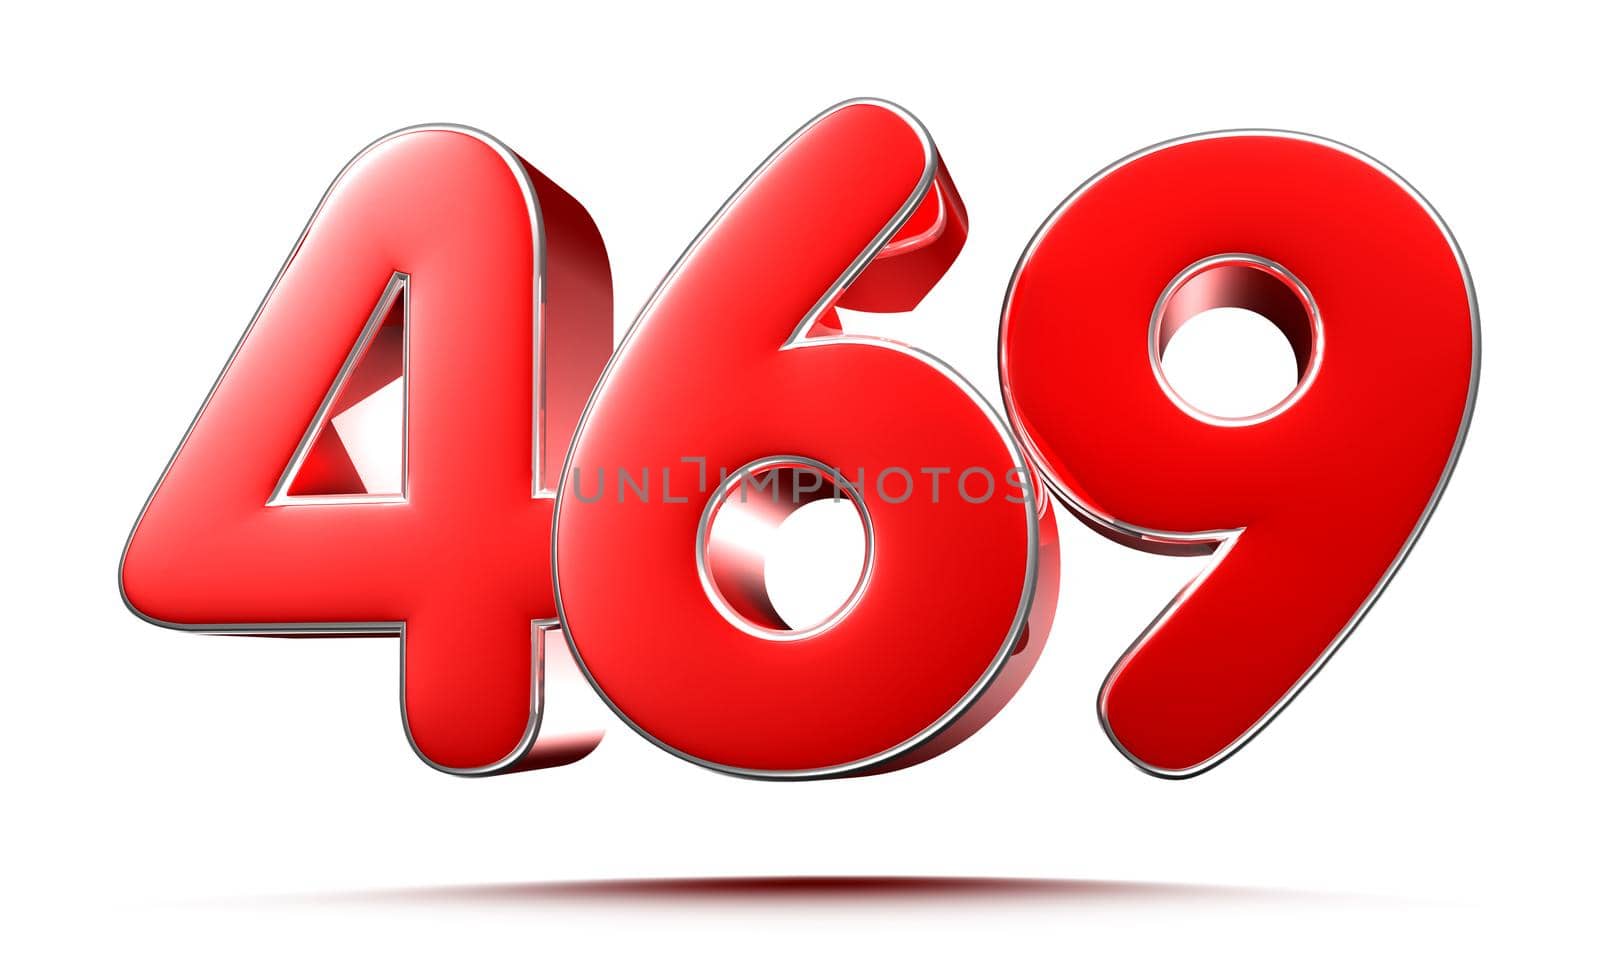 Rounded red numbers 469 on white background 3D illustration with clipping path by thitimontoyai